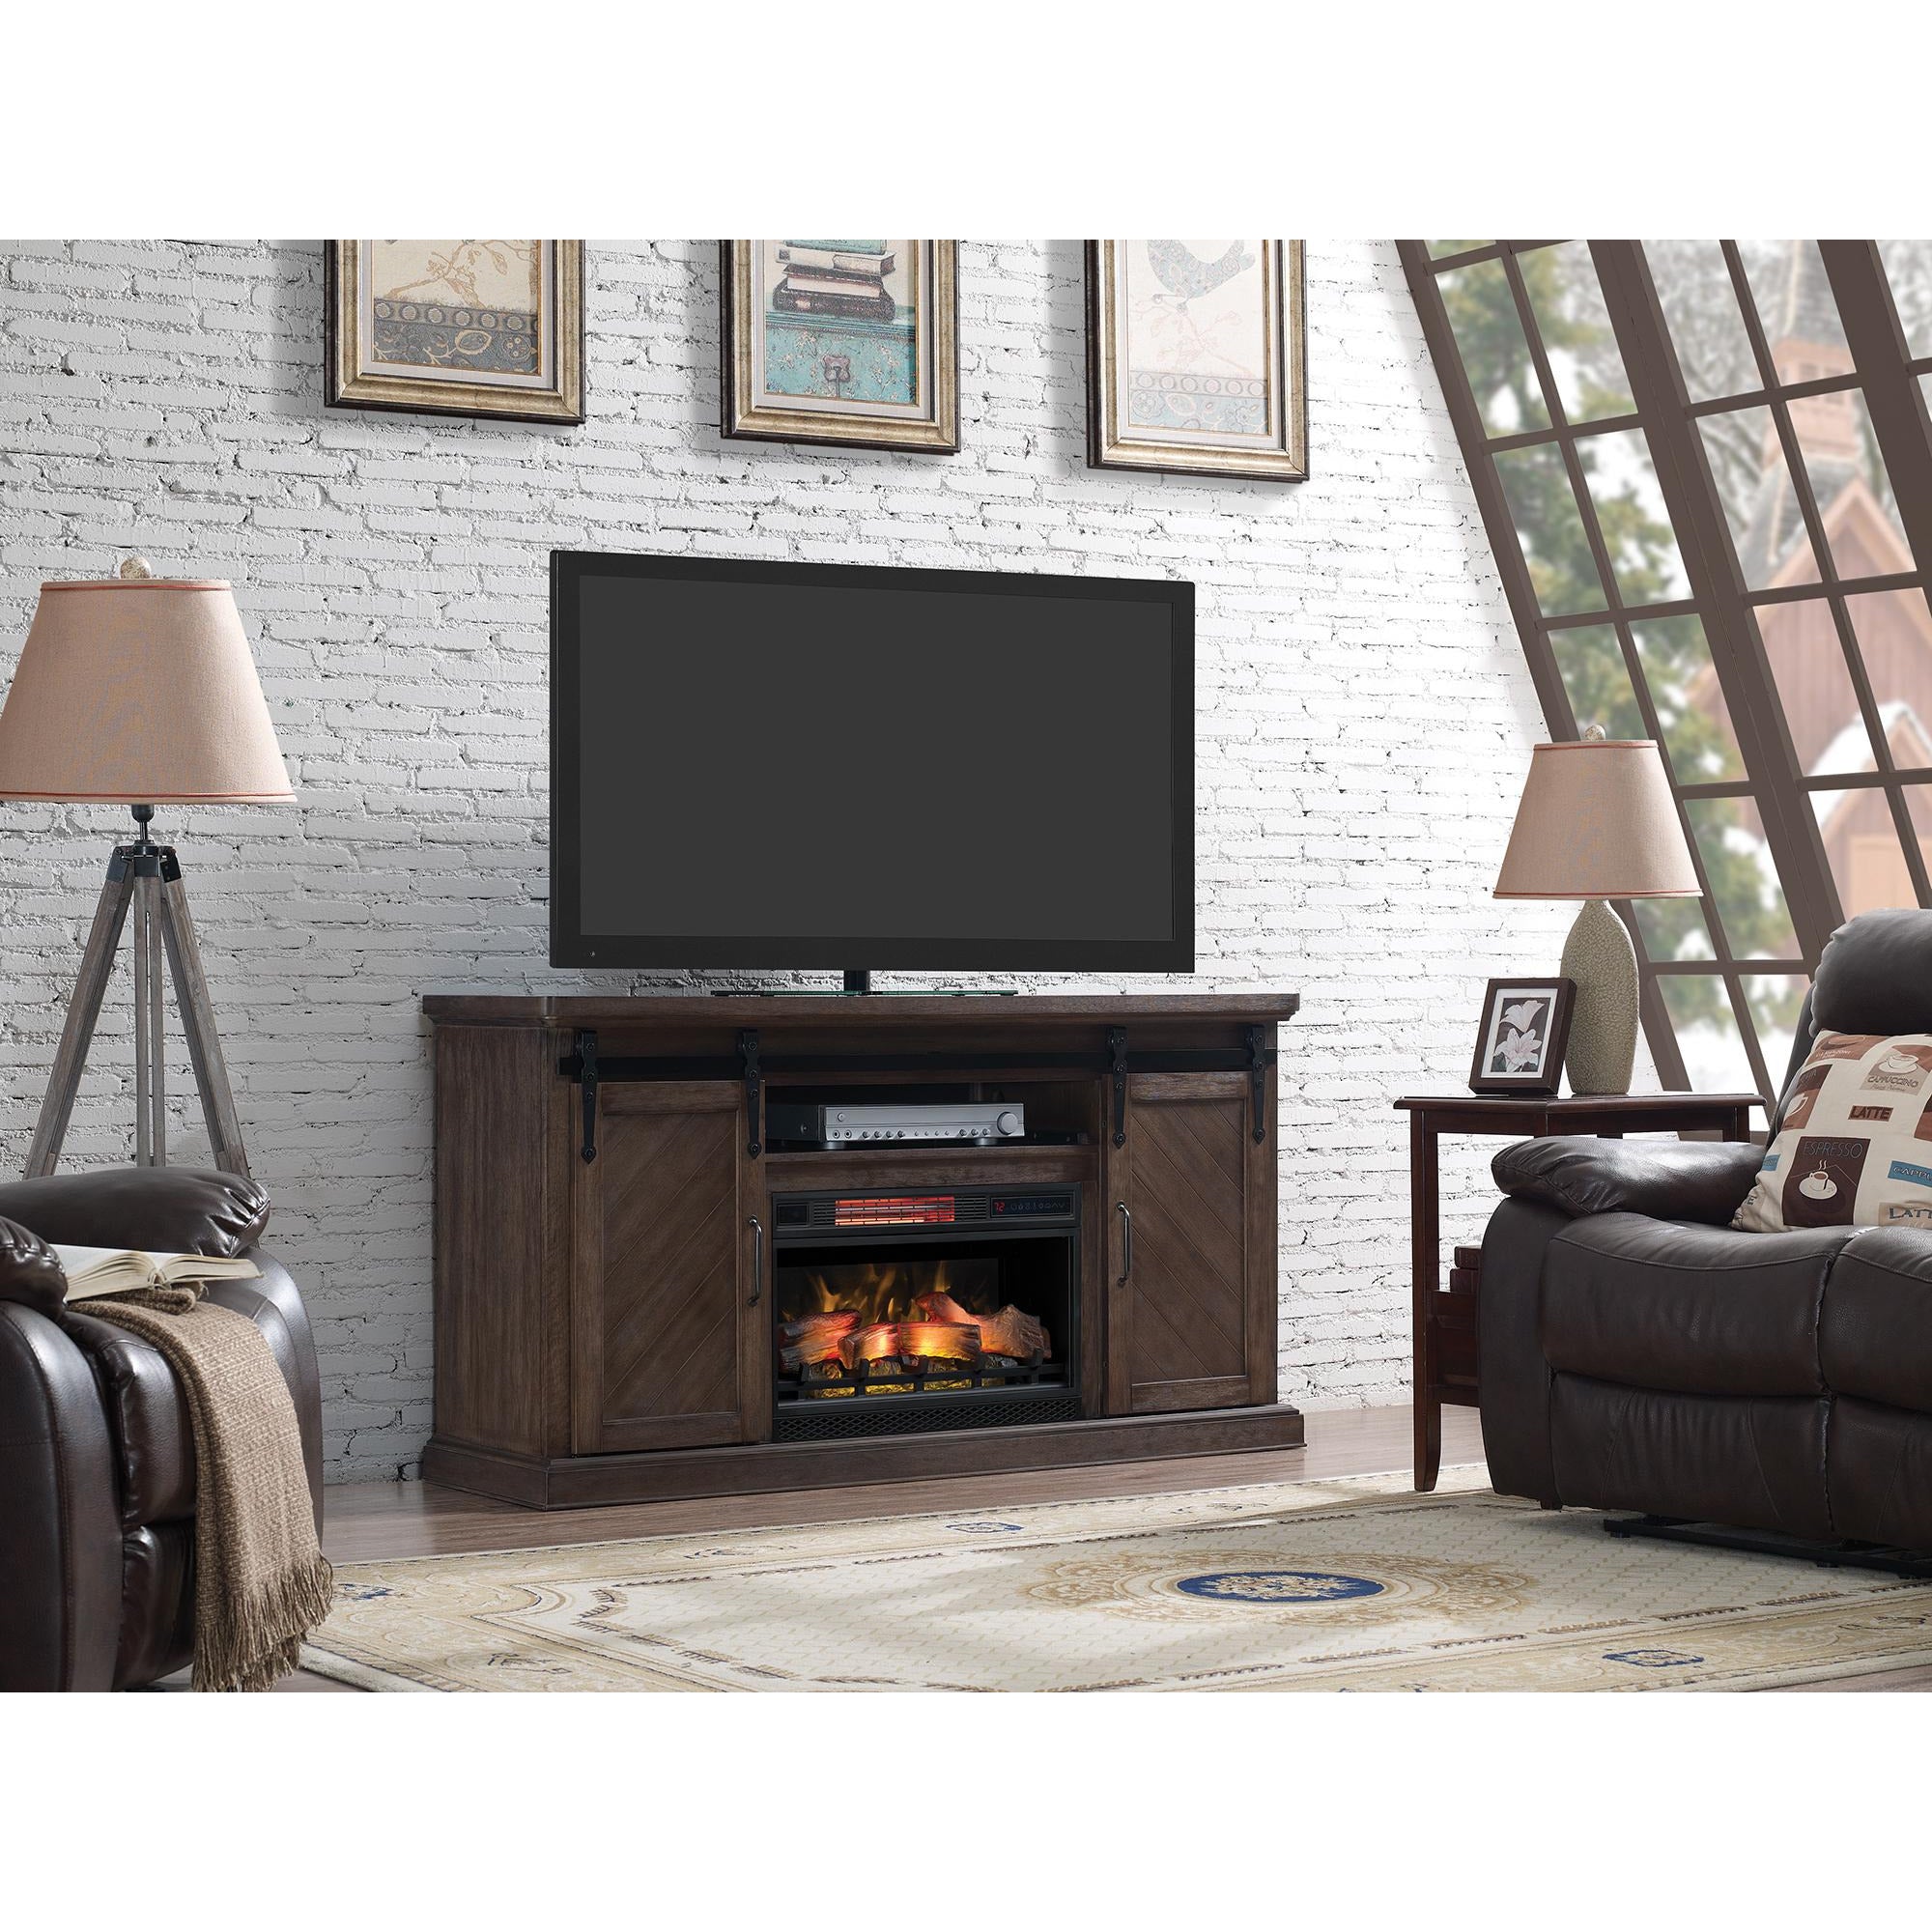 Southgate Fireplace TV Stand